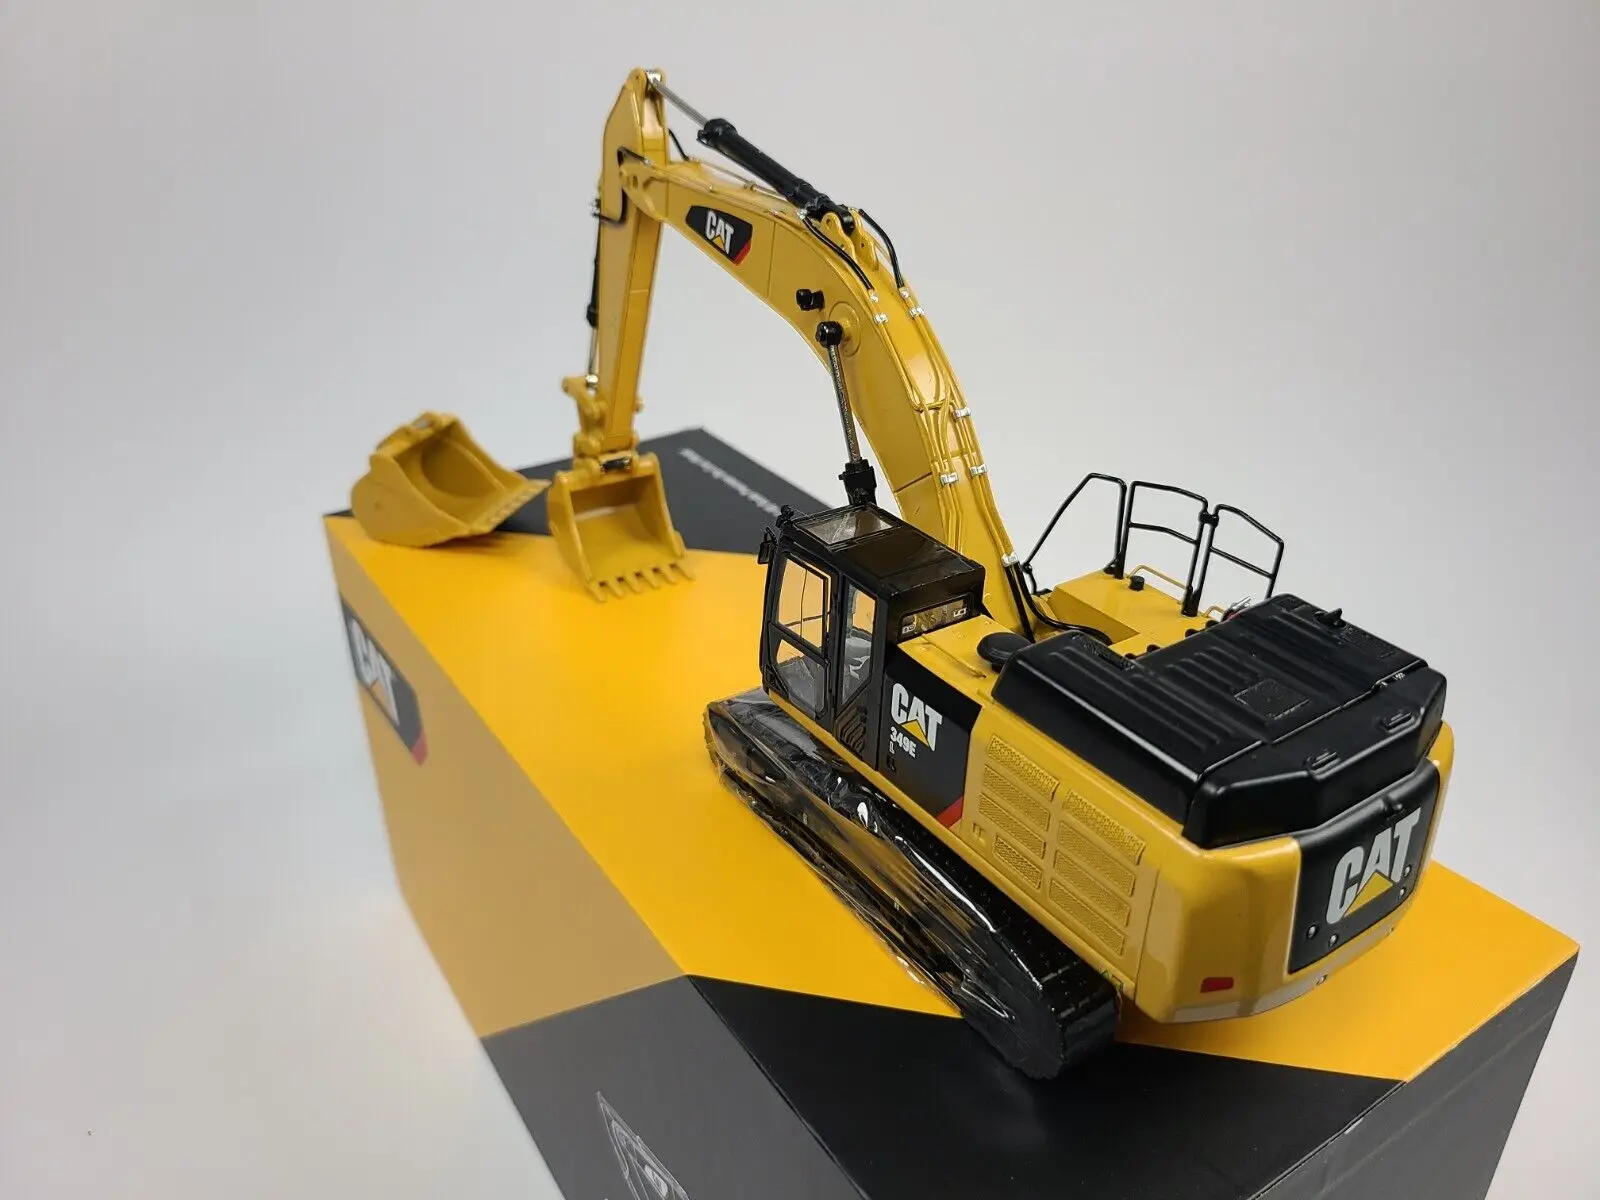 Exqusite Alloy Model Gift CCM 1:48 Caterpillar CAT 349E L Hydraulic  Excavator Engineering Machinery Diecast Toy Model